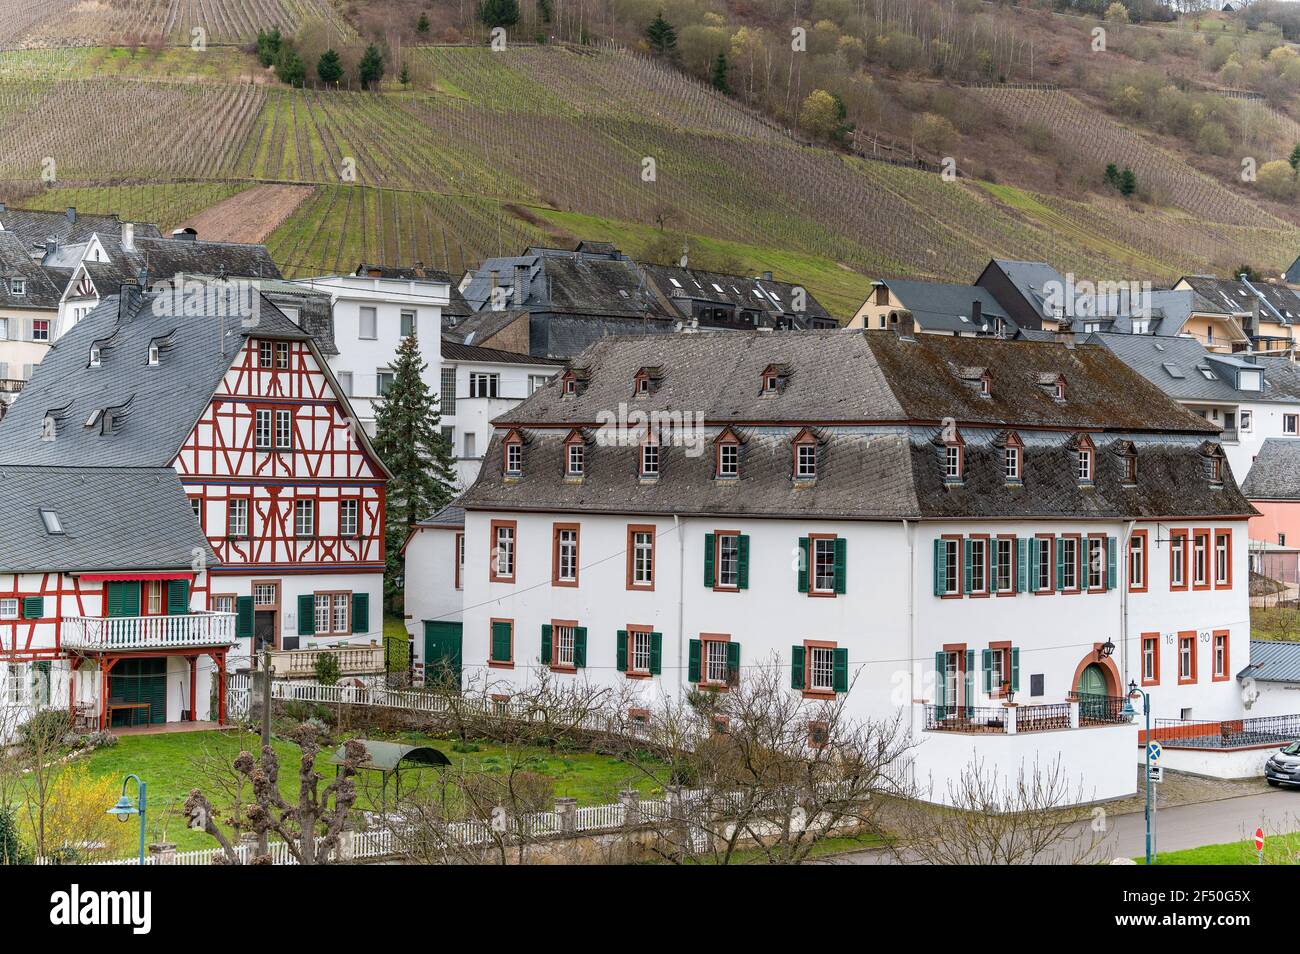 wine architecture in the Mosel Valley, Steffens-Kess winery, Reil, Germany Stock Photo